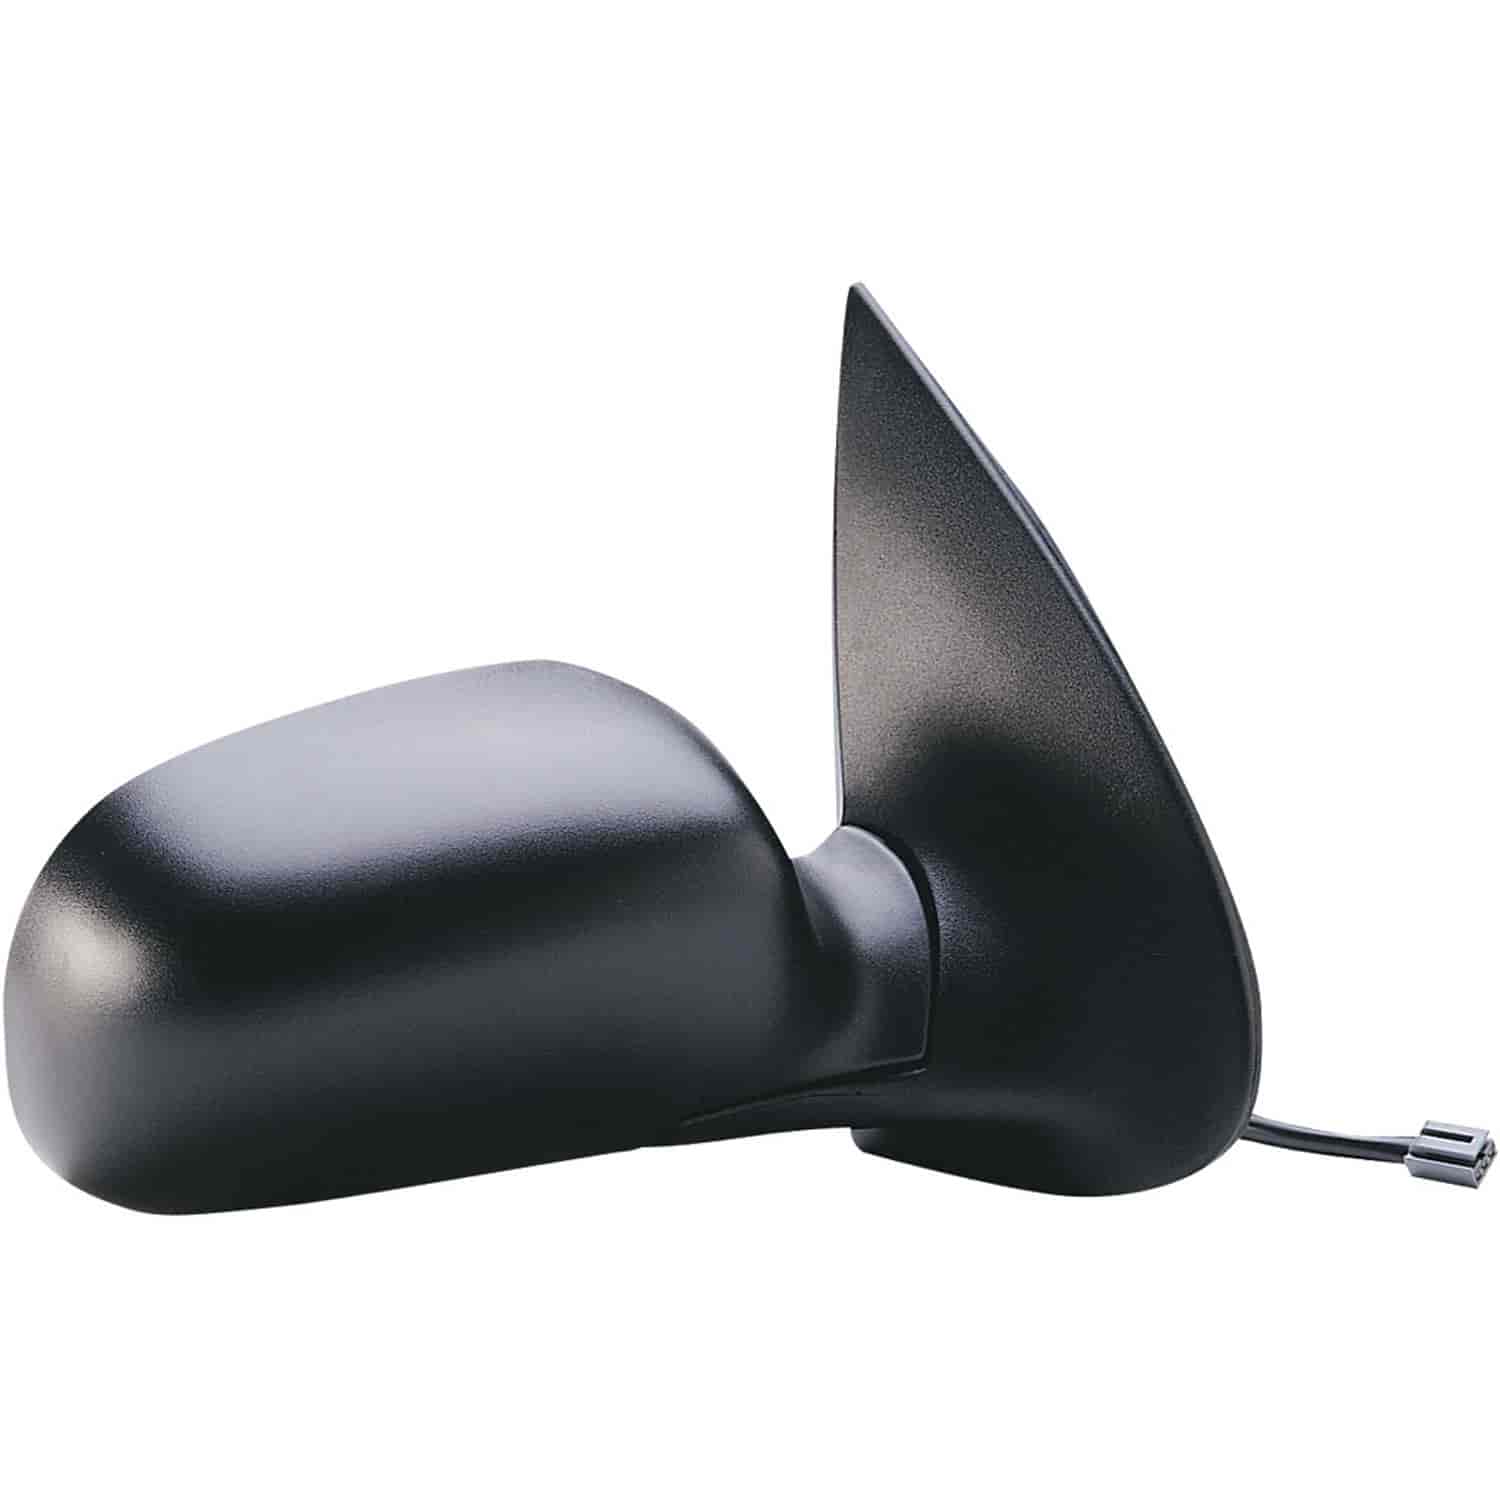 OEM Style Replacement mirror for 95-98 Ford Windstar passenger side mirror tested to fit and functio